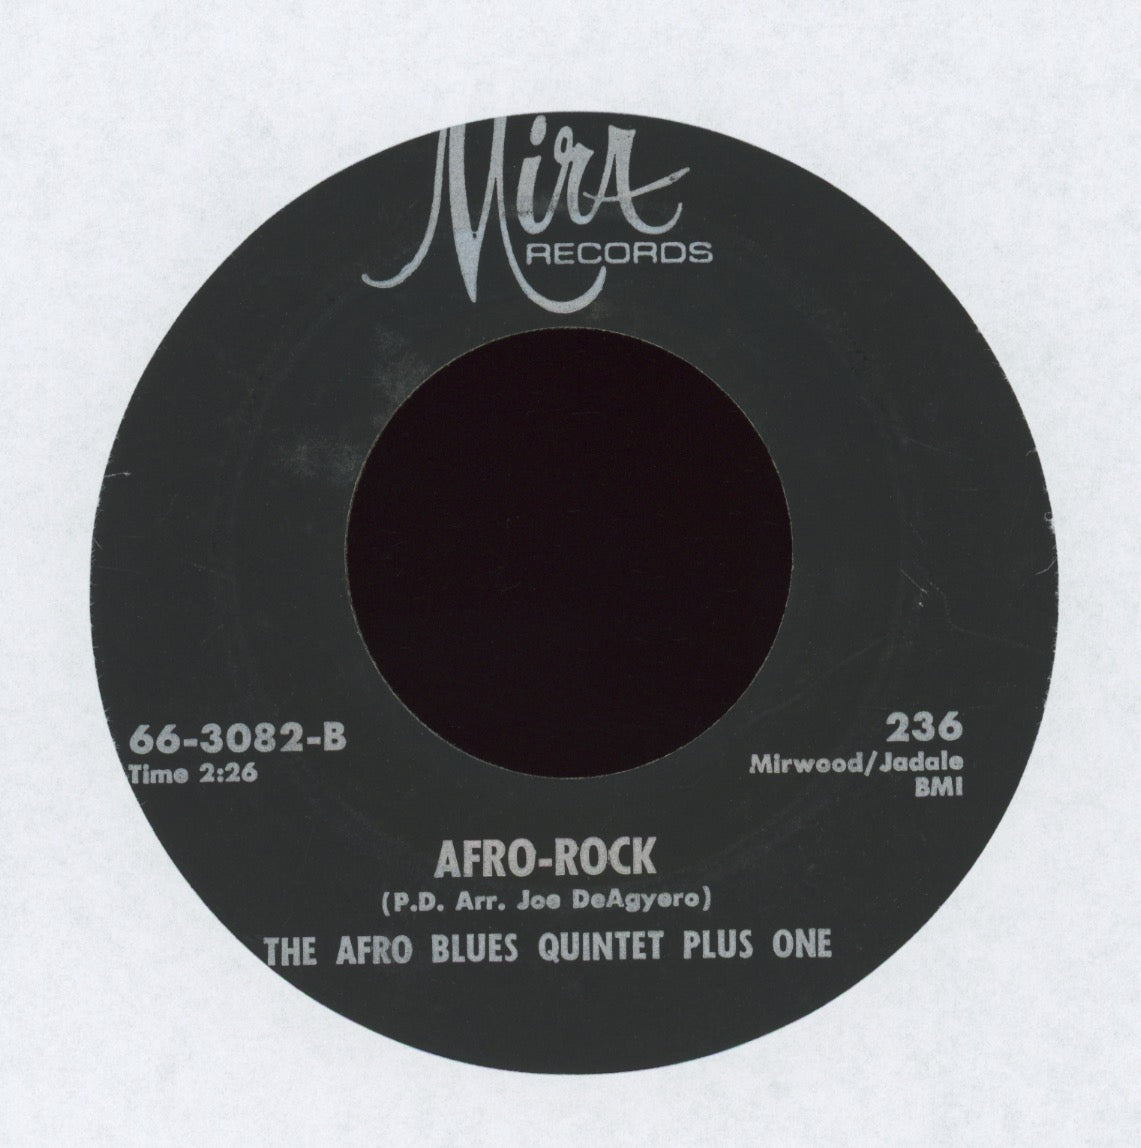 The Afro Blues Quintet Plus One - Afro-Rock on Mira